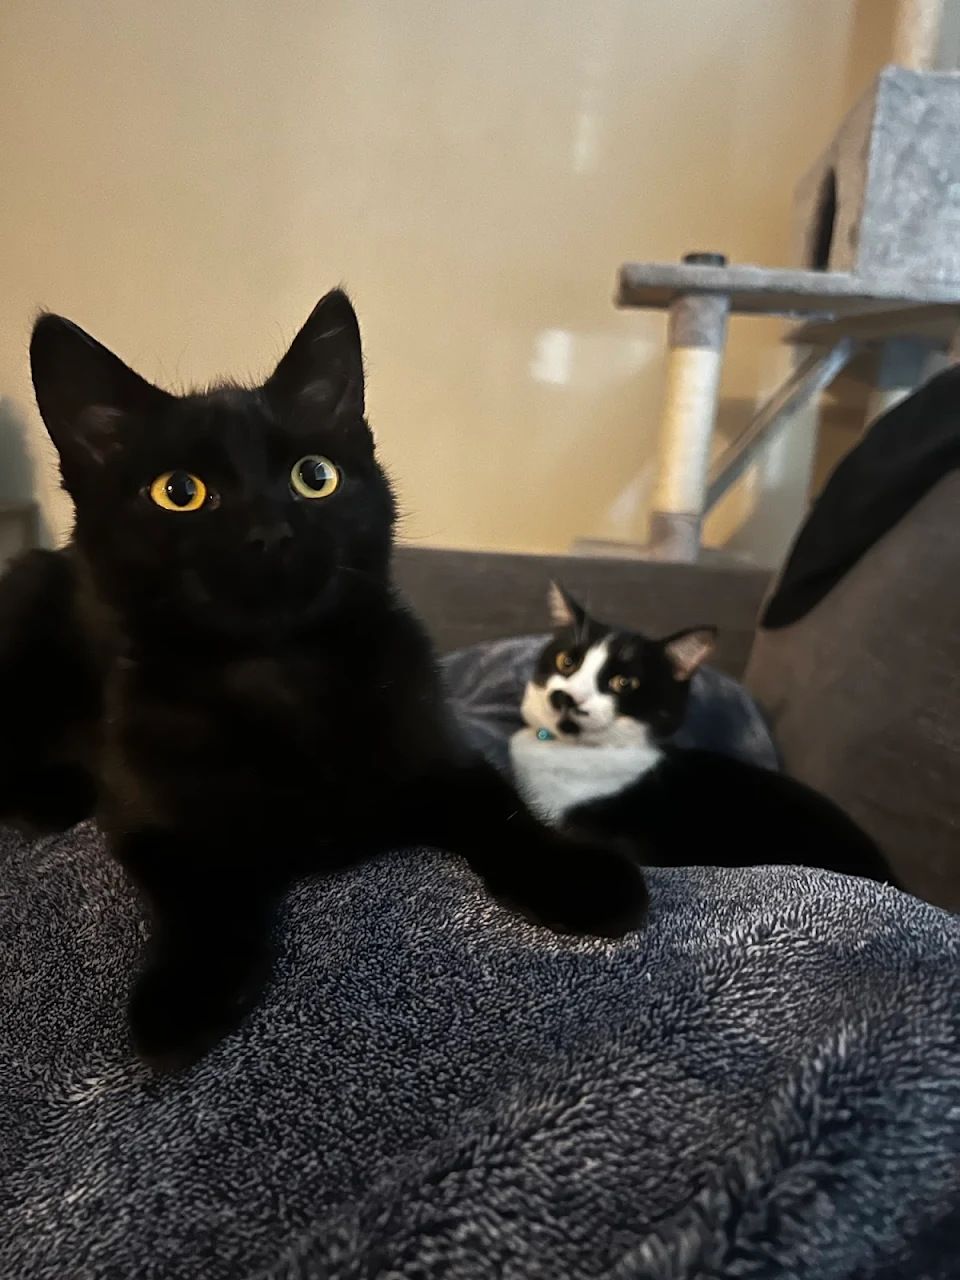 We got a new kitten and our original cat is…not thrilled, to say the least.